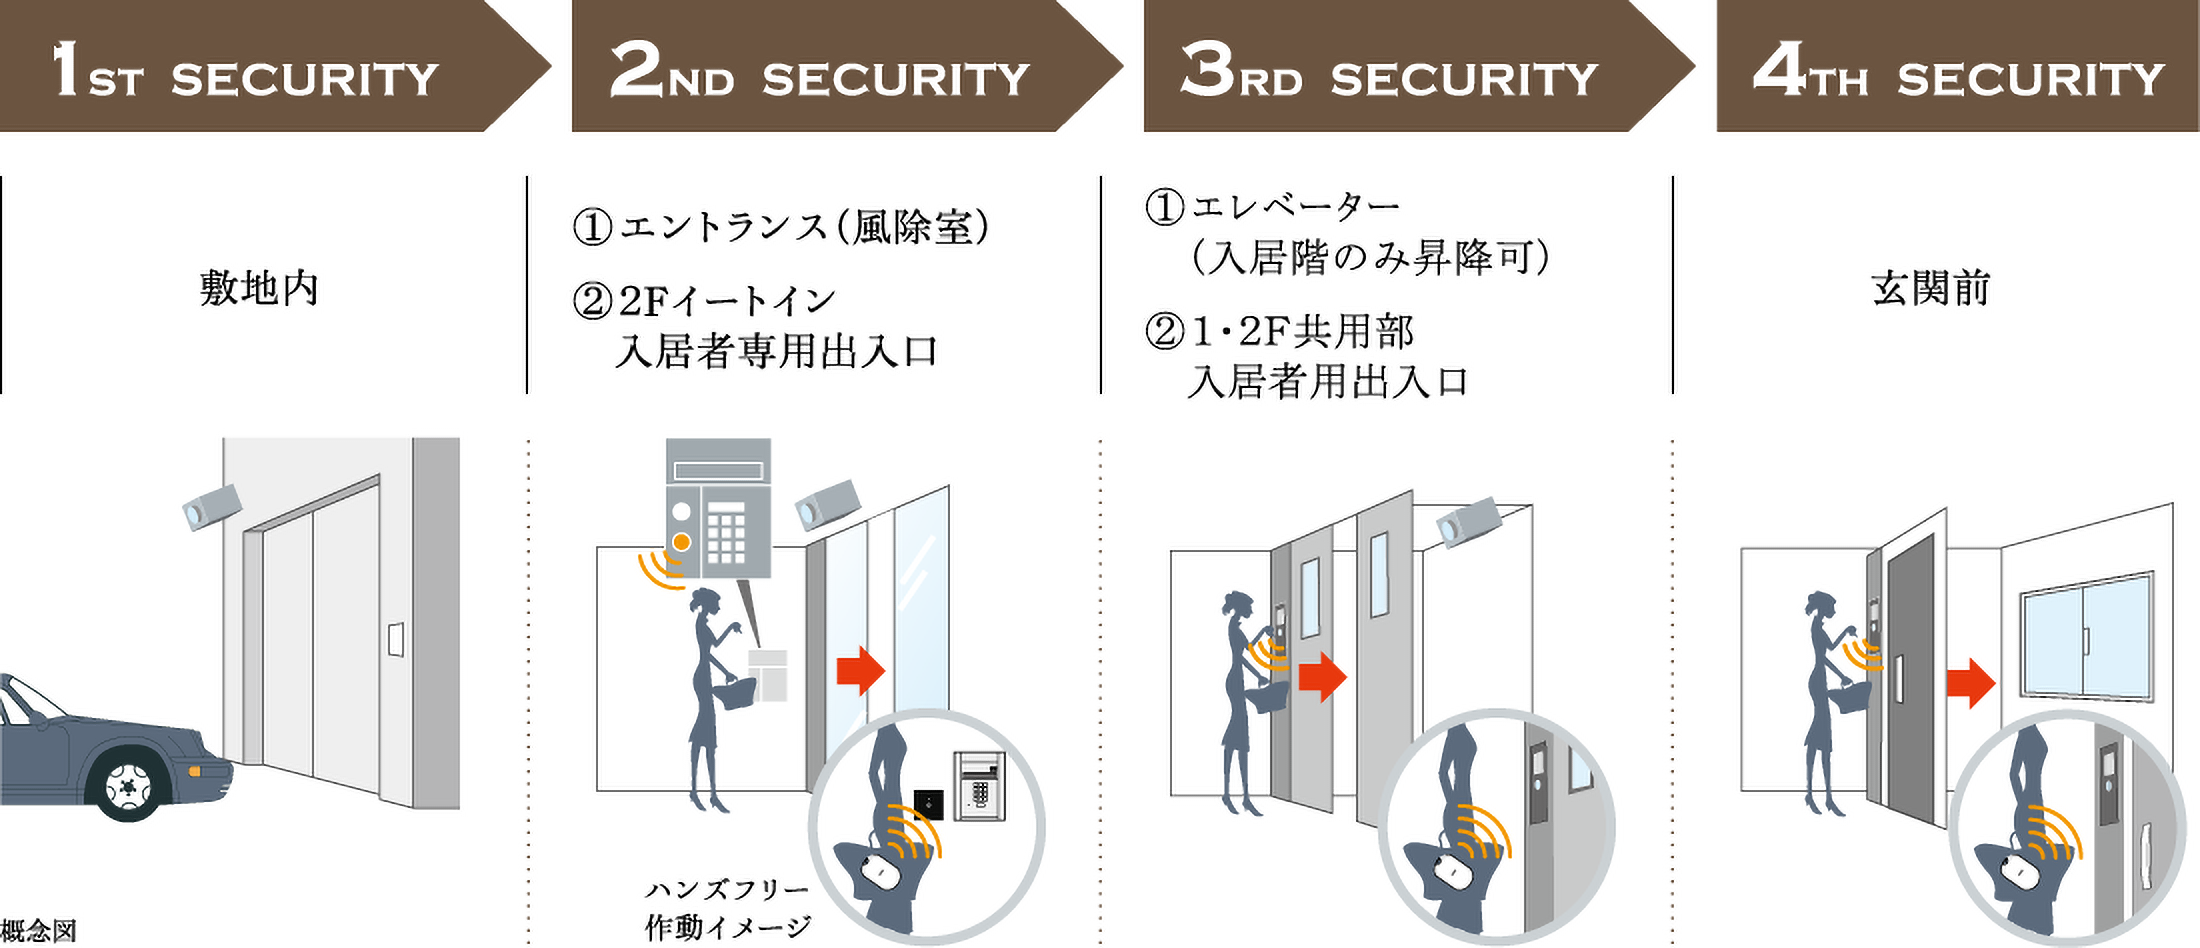 4GUARD SECURITY SYSTEM